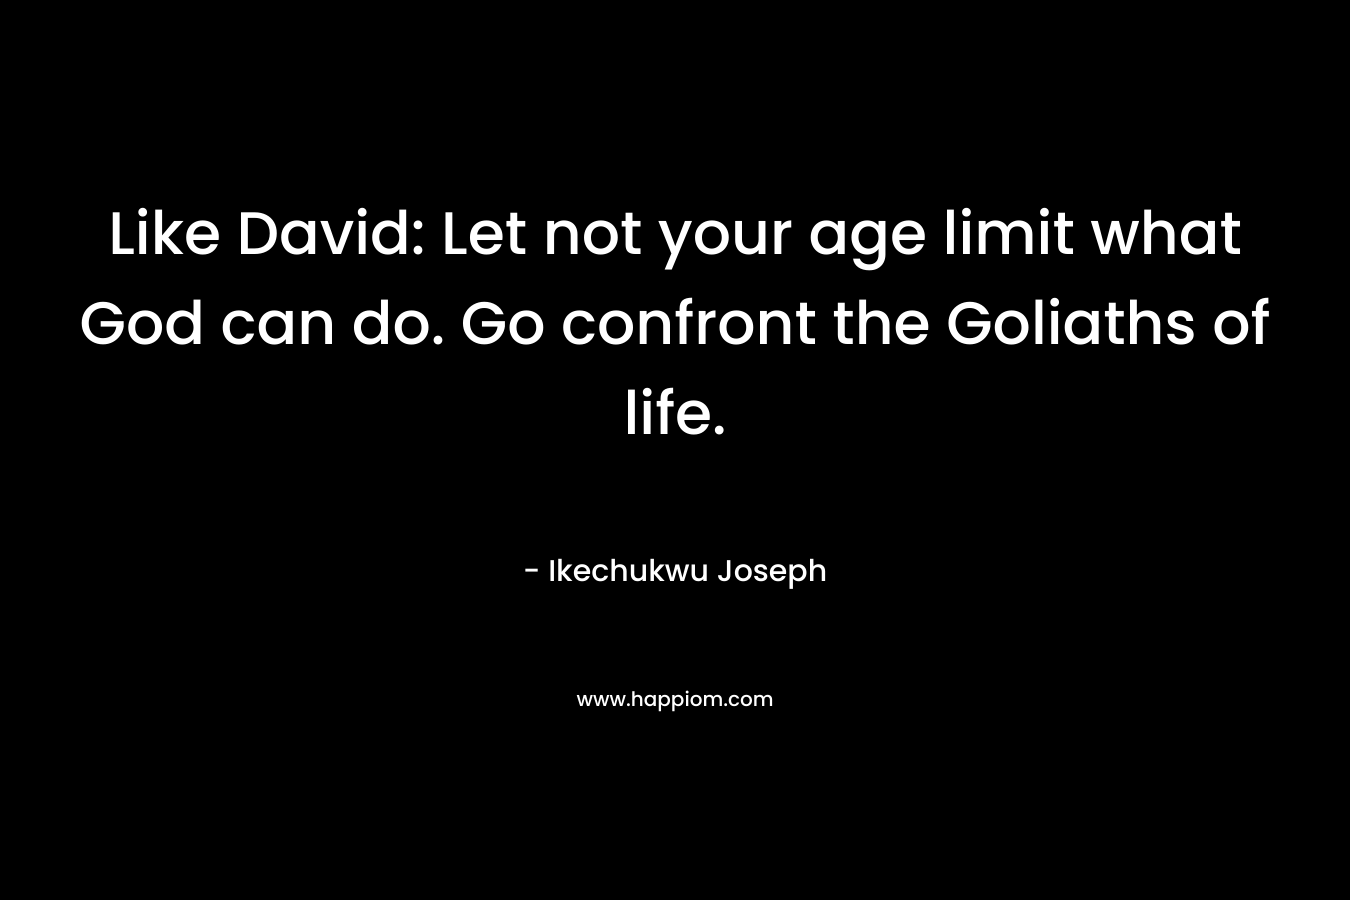 Like David: Let not your age limit what God can do. Go confront the Goliaths of life. – Ikechukwu Joseph